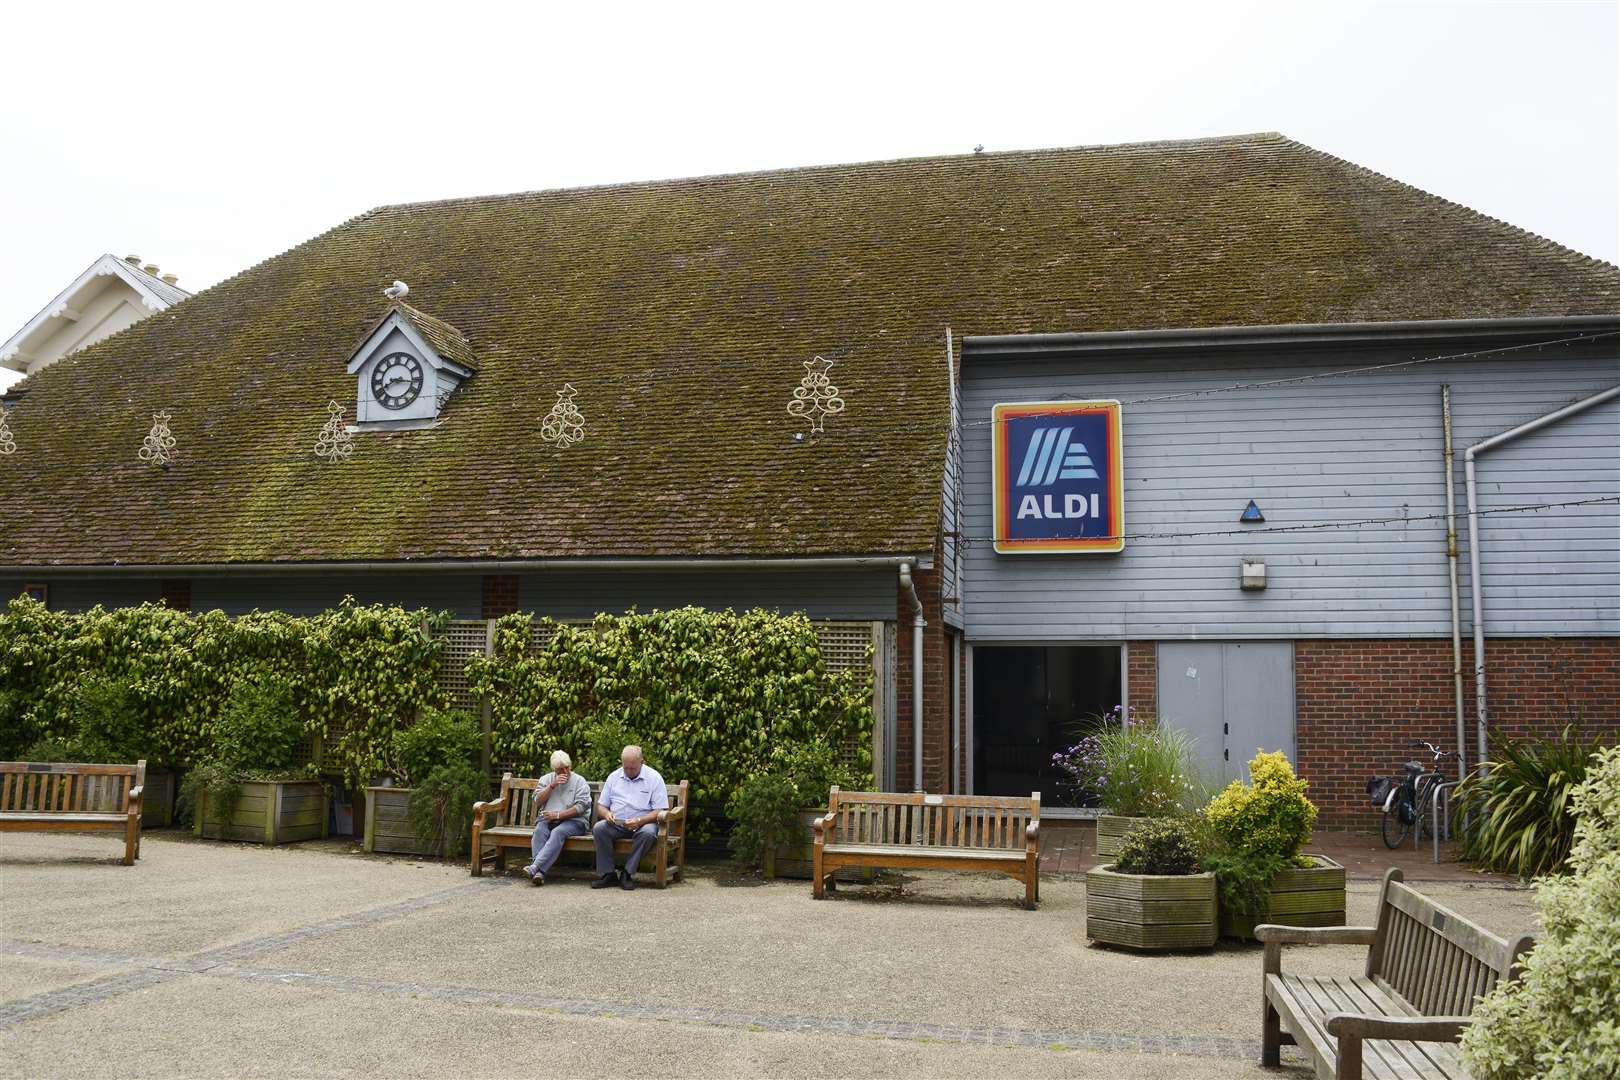 Aldi's current store in Hythe